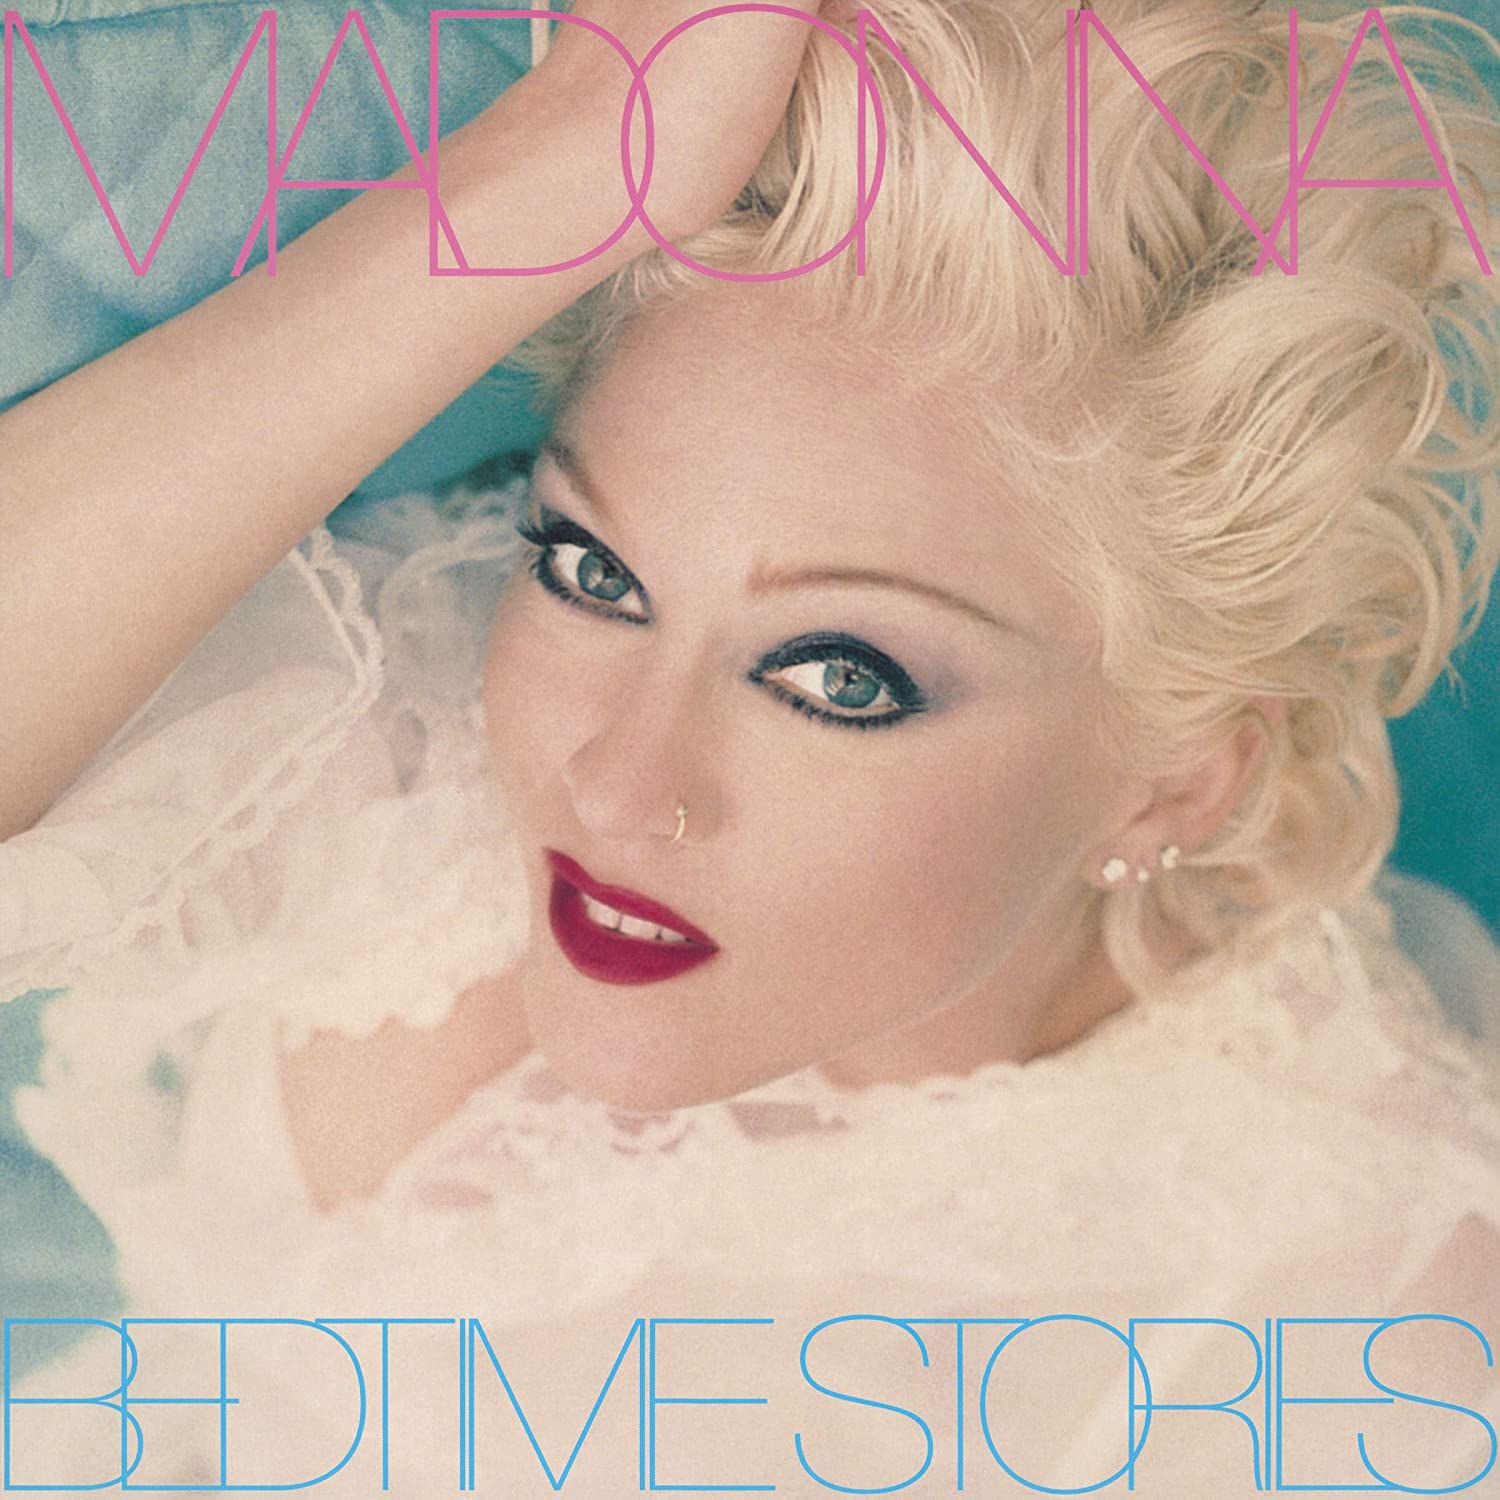 madonna discography movie songs